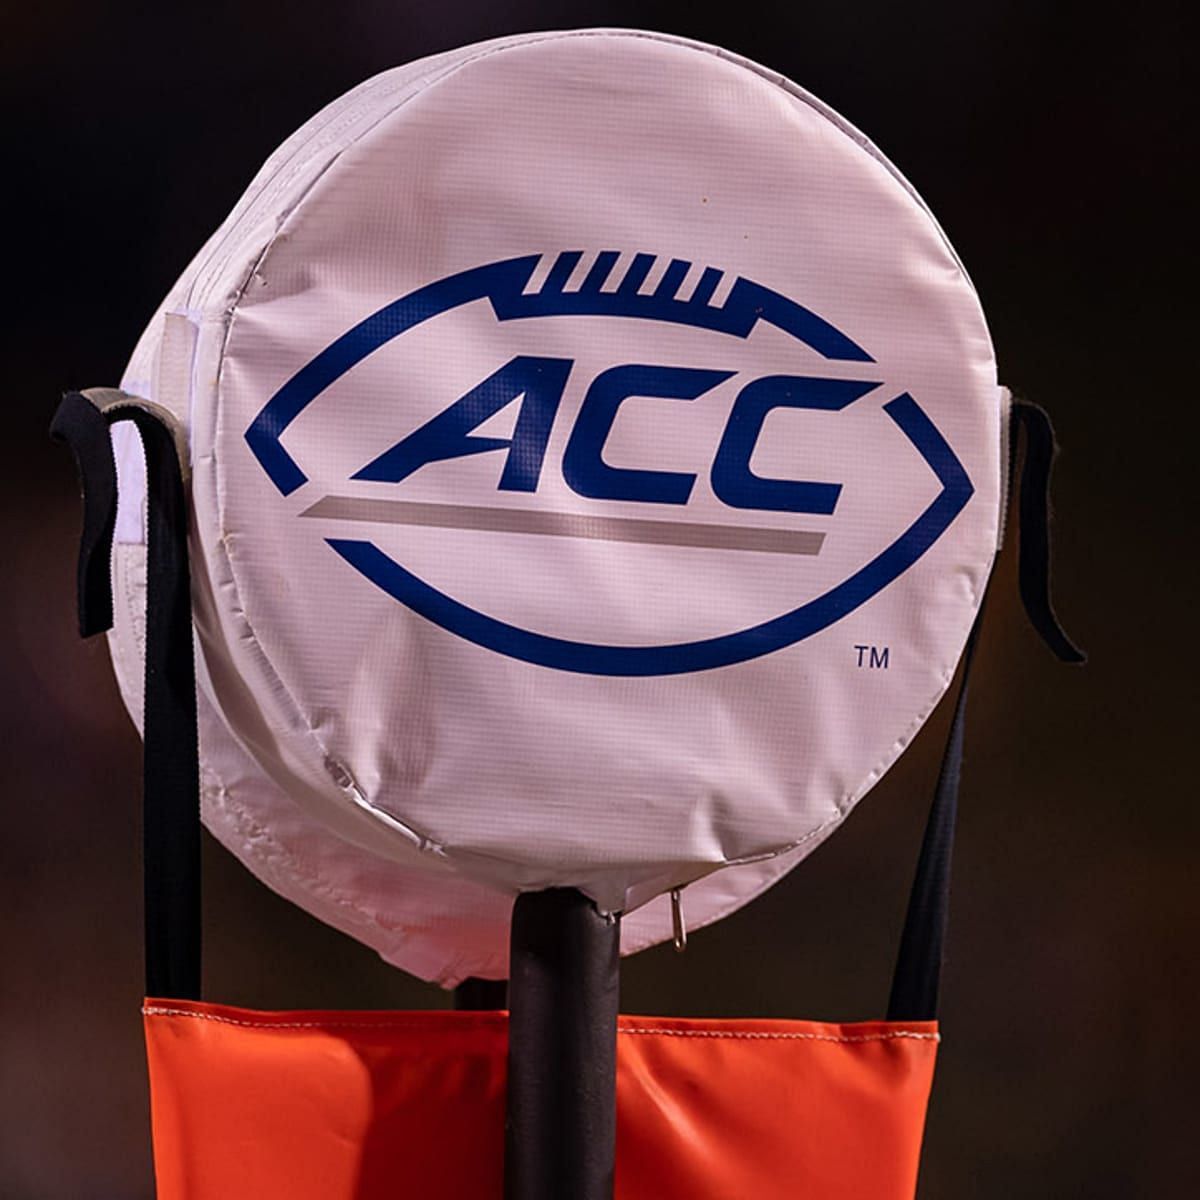 How to stream the ACC network? Exploring how to watch ACCs slate of college football games without cable